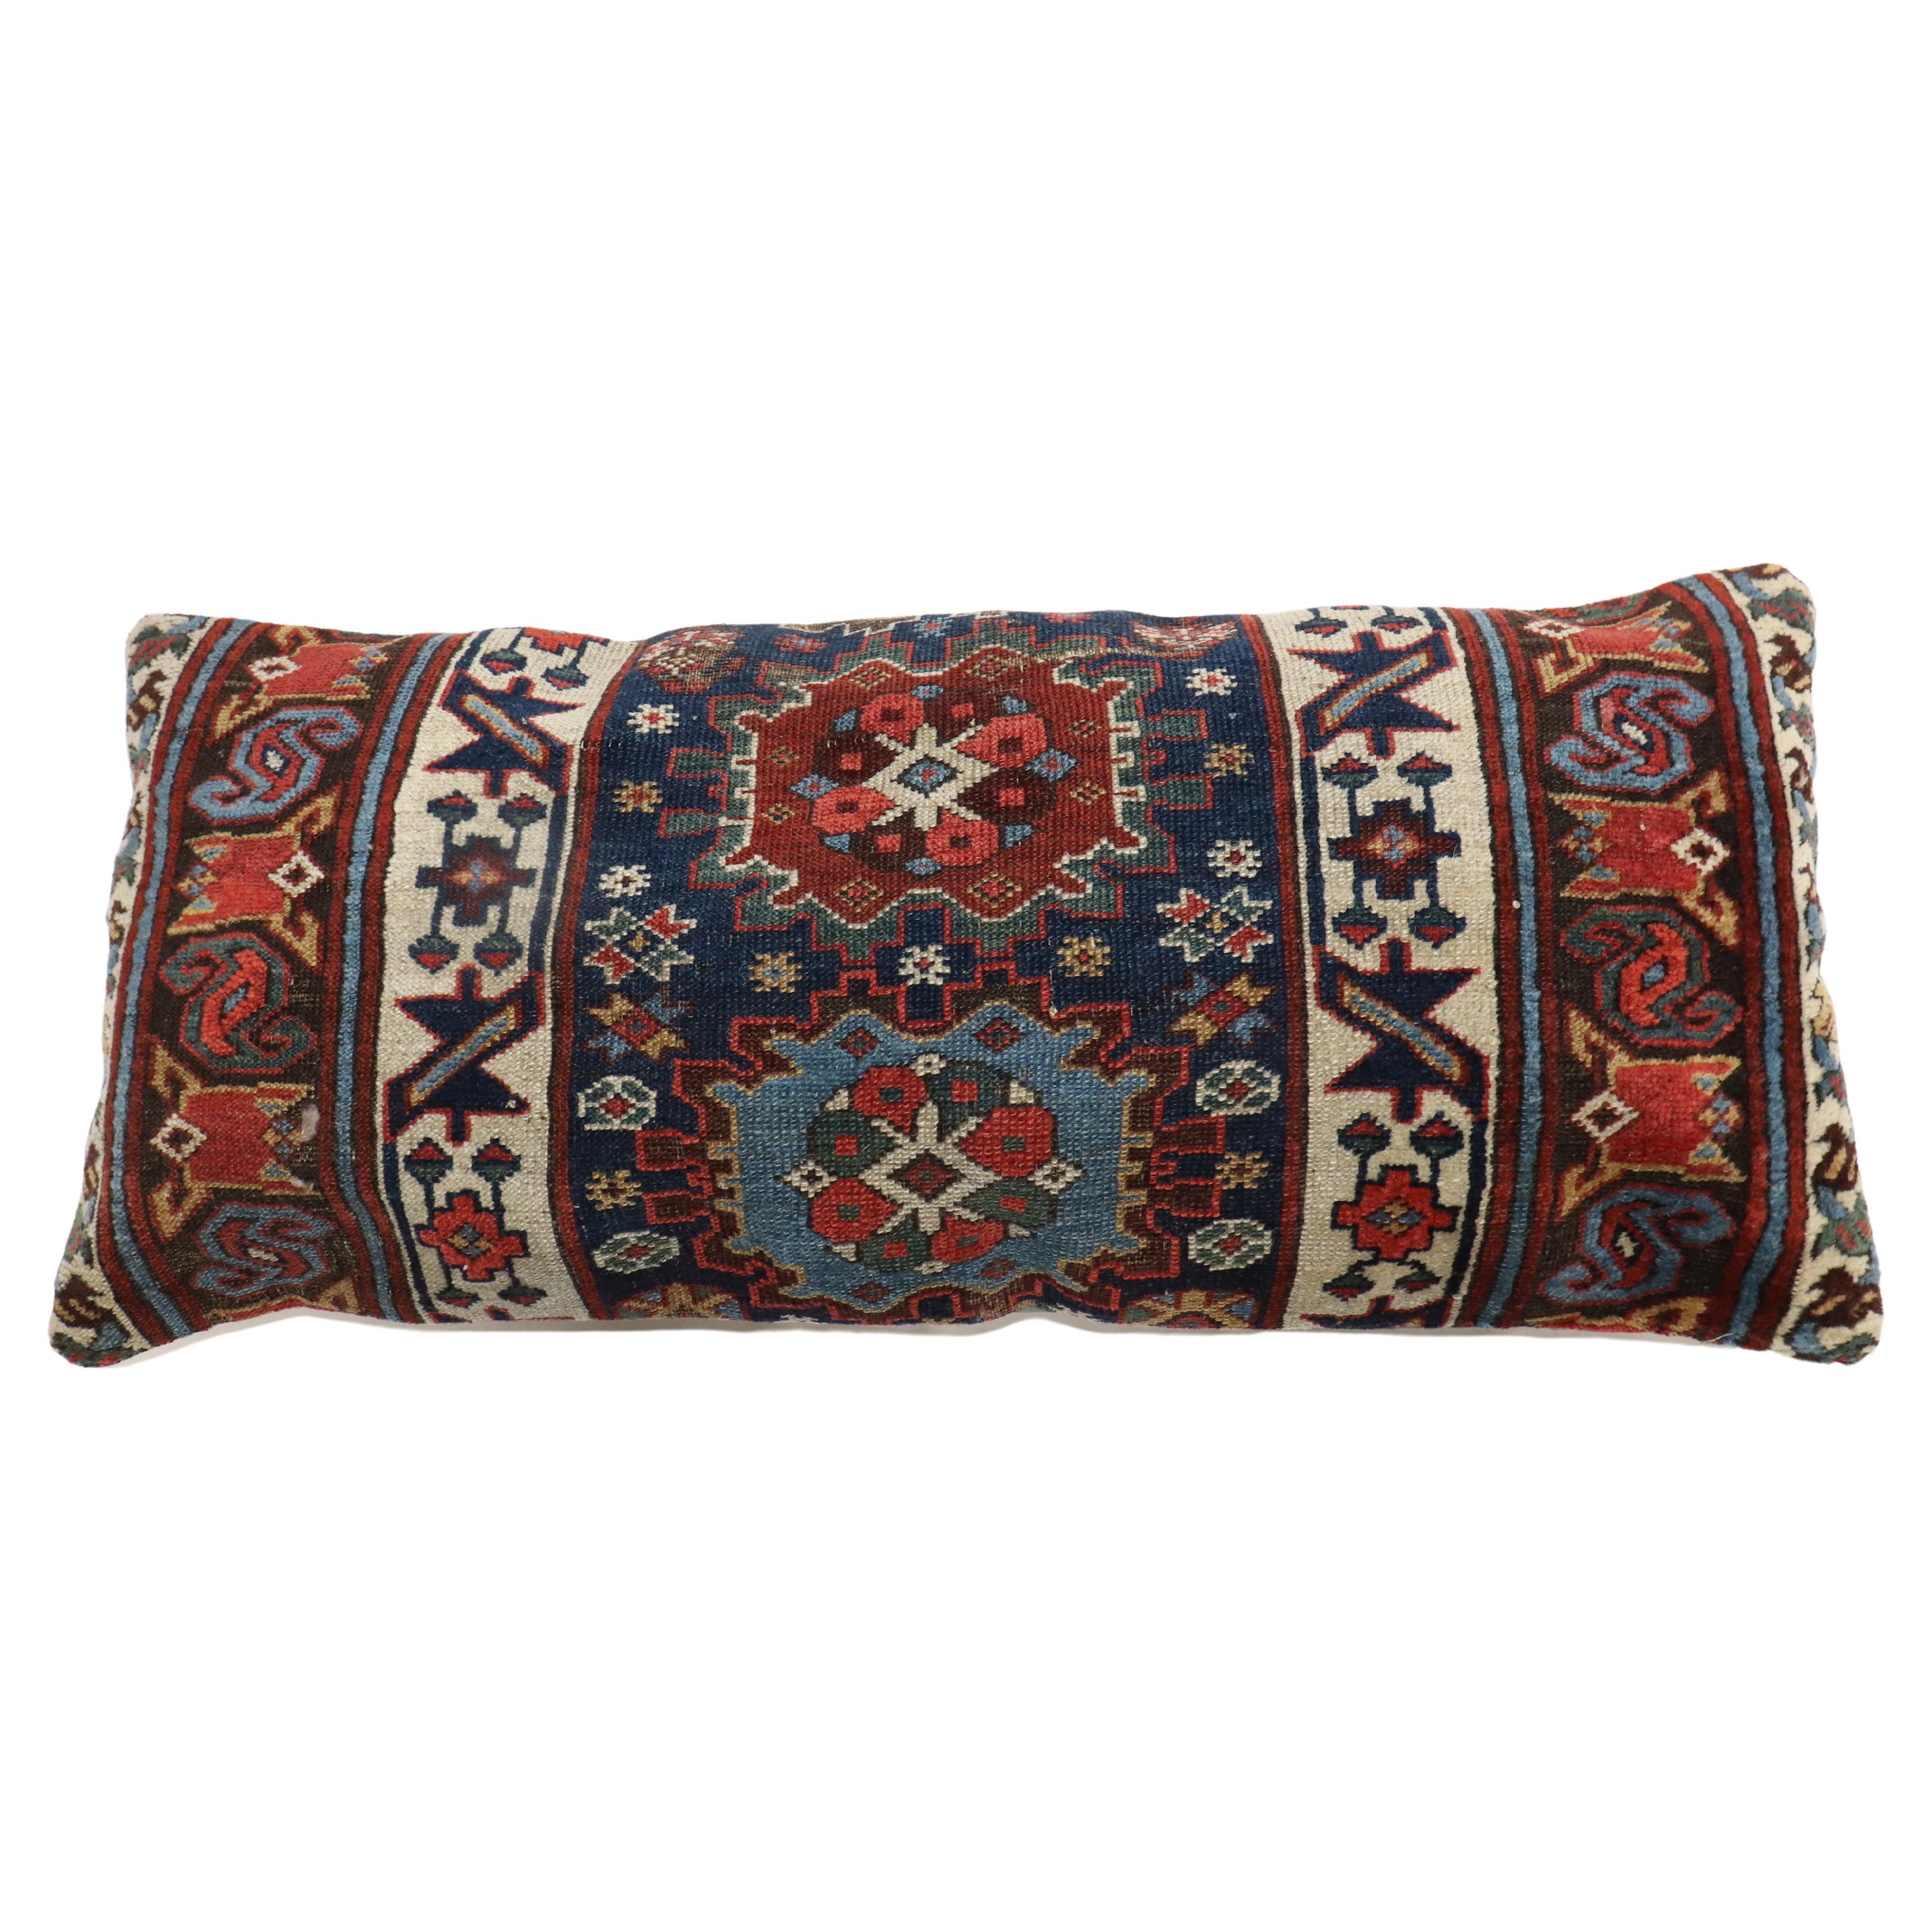 Large Bolster size pillow made from an early 20th century Northwest Persian rug.

Measures: 1'3'' x 2'11''